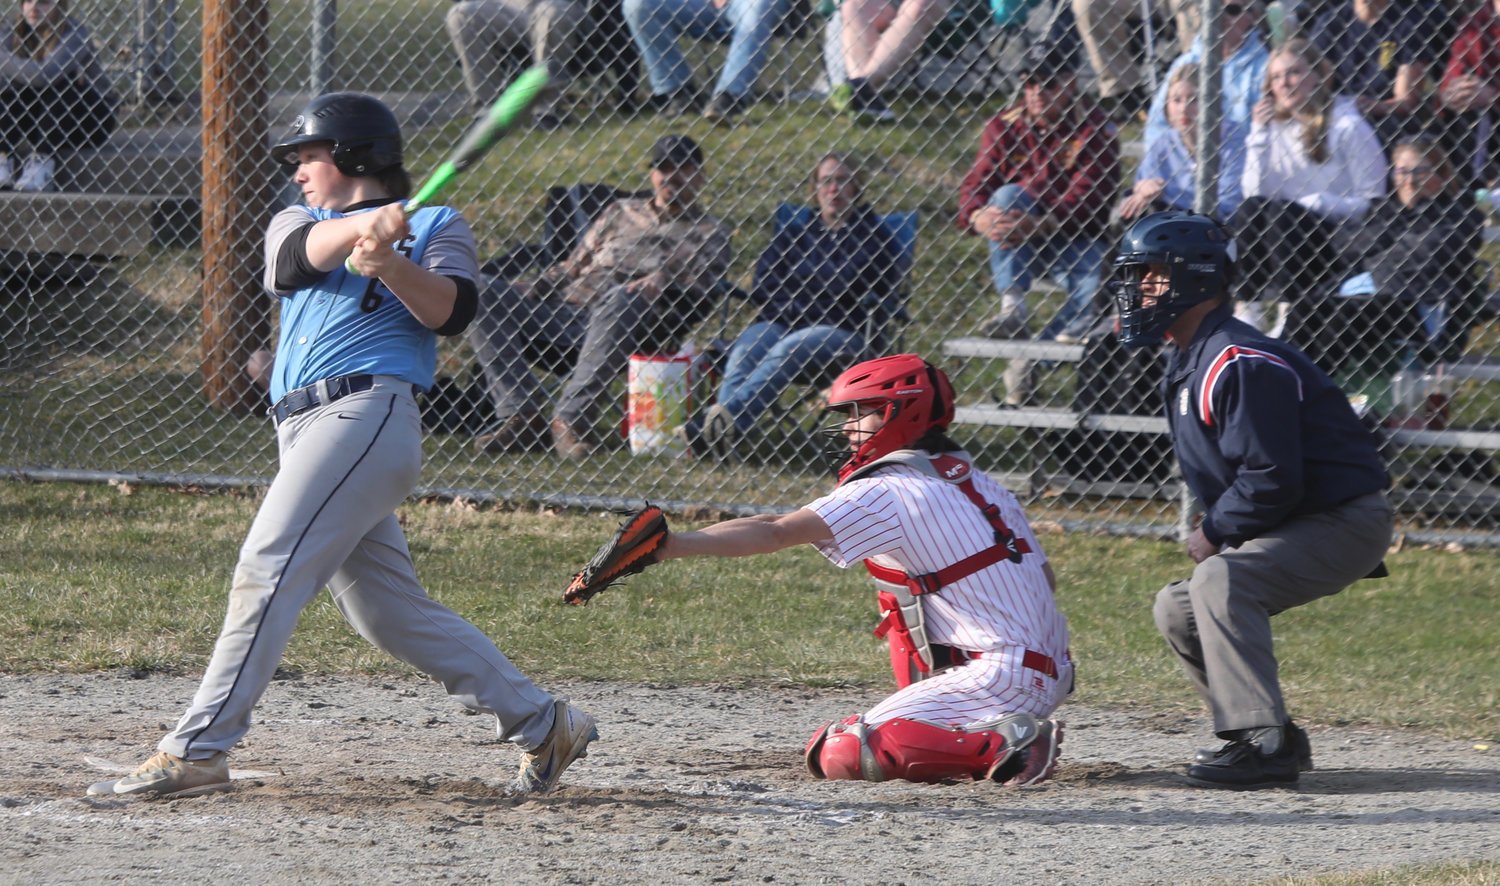 Sullivan West senior Gavin Hauschild blasts a double in the third inning. He amassed  four RBI in the game.